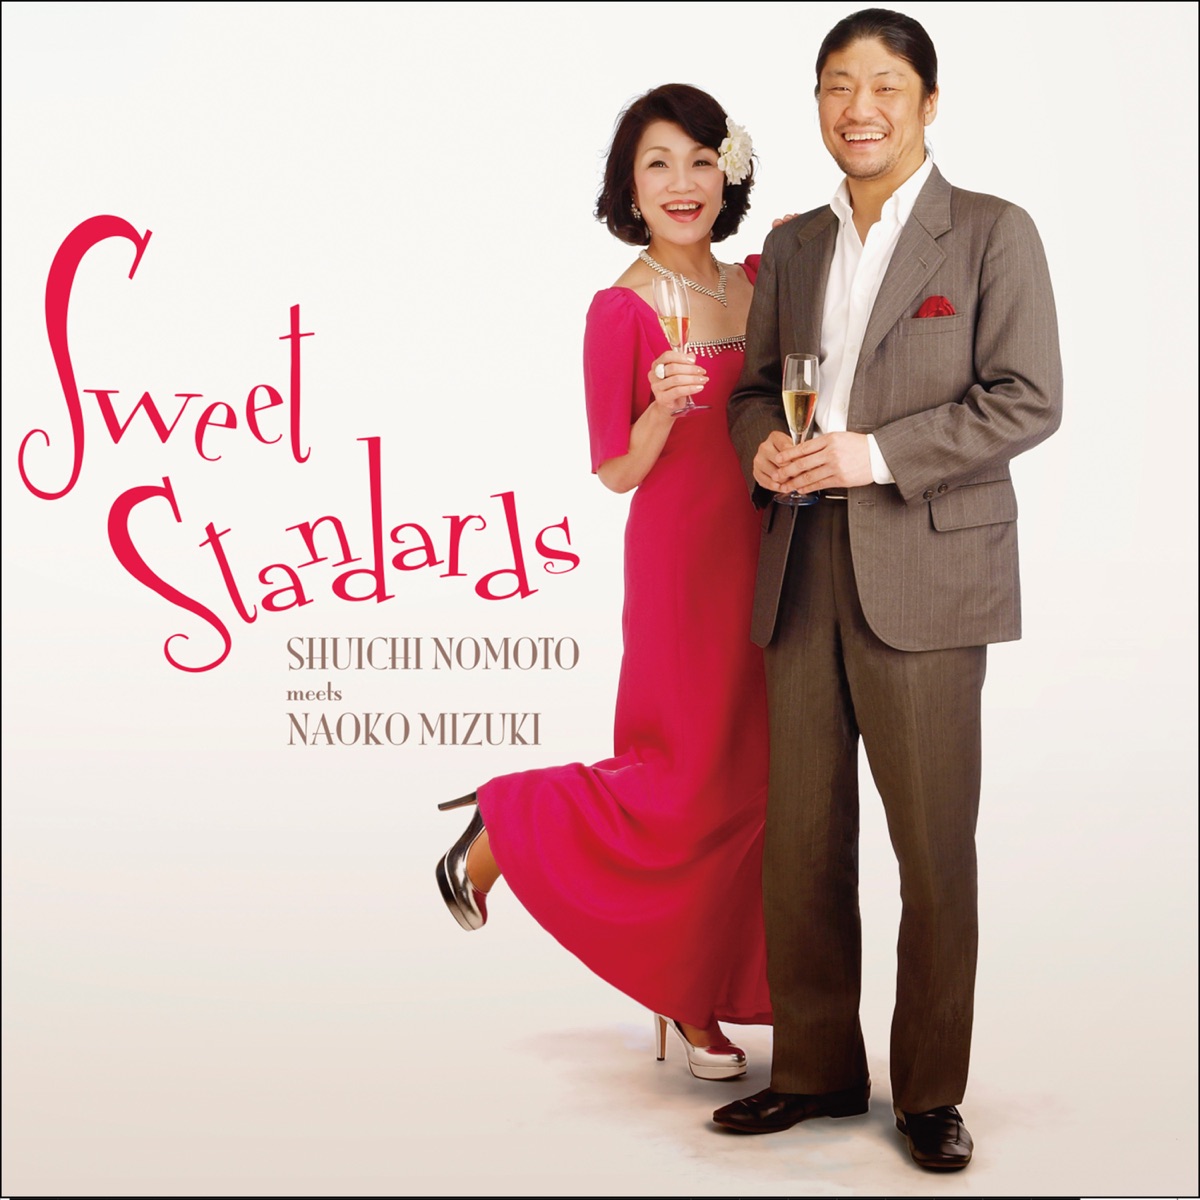 Sweet Standards - Album by 野本秀一 meets 三槻直子 - Apple Music